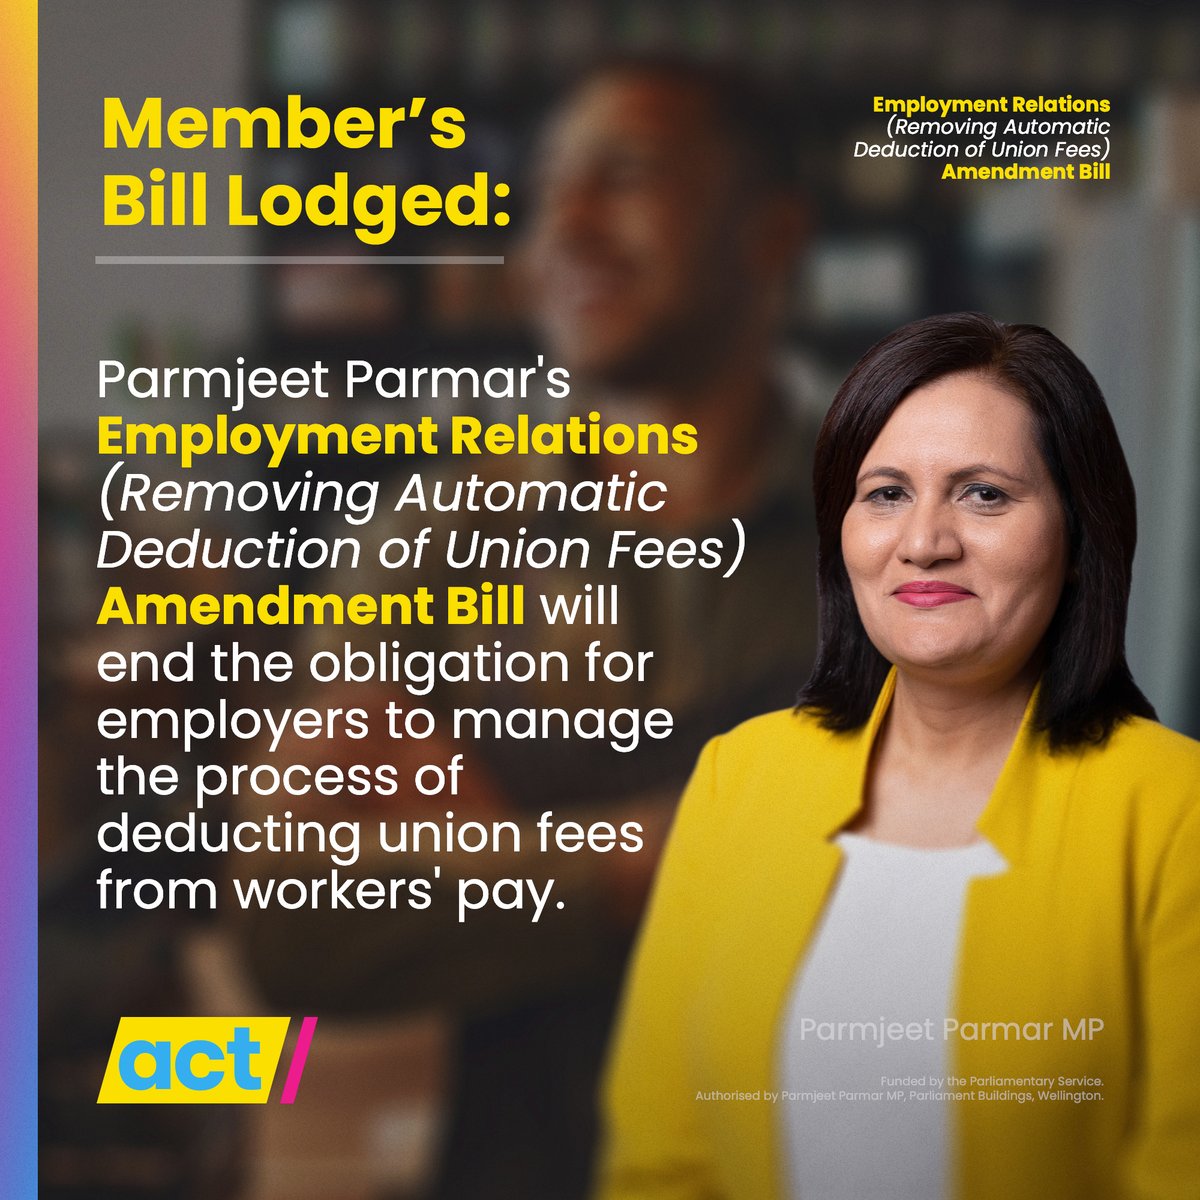 The playing field is currently tilted in favour of the unions. @Parmjeet_Parmar's member's bill is a step towards rebalancing the scales.